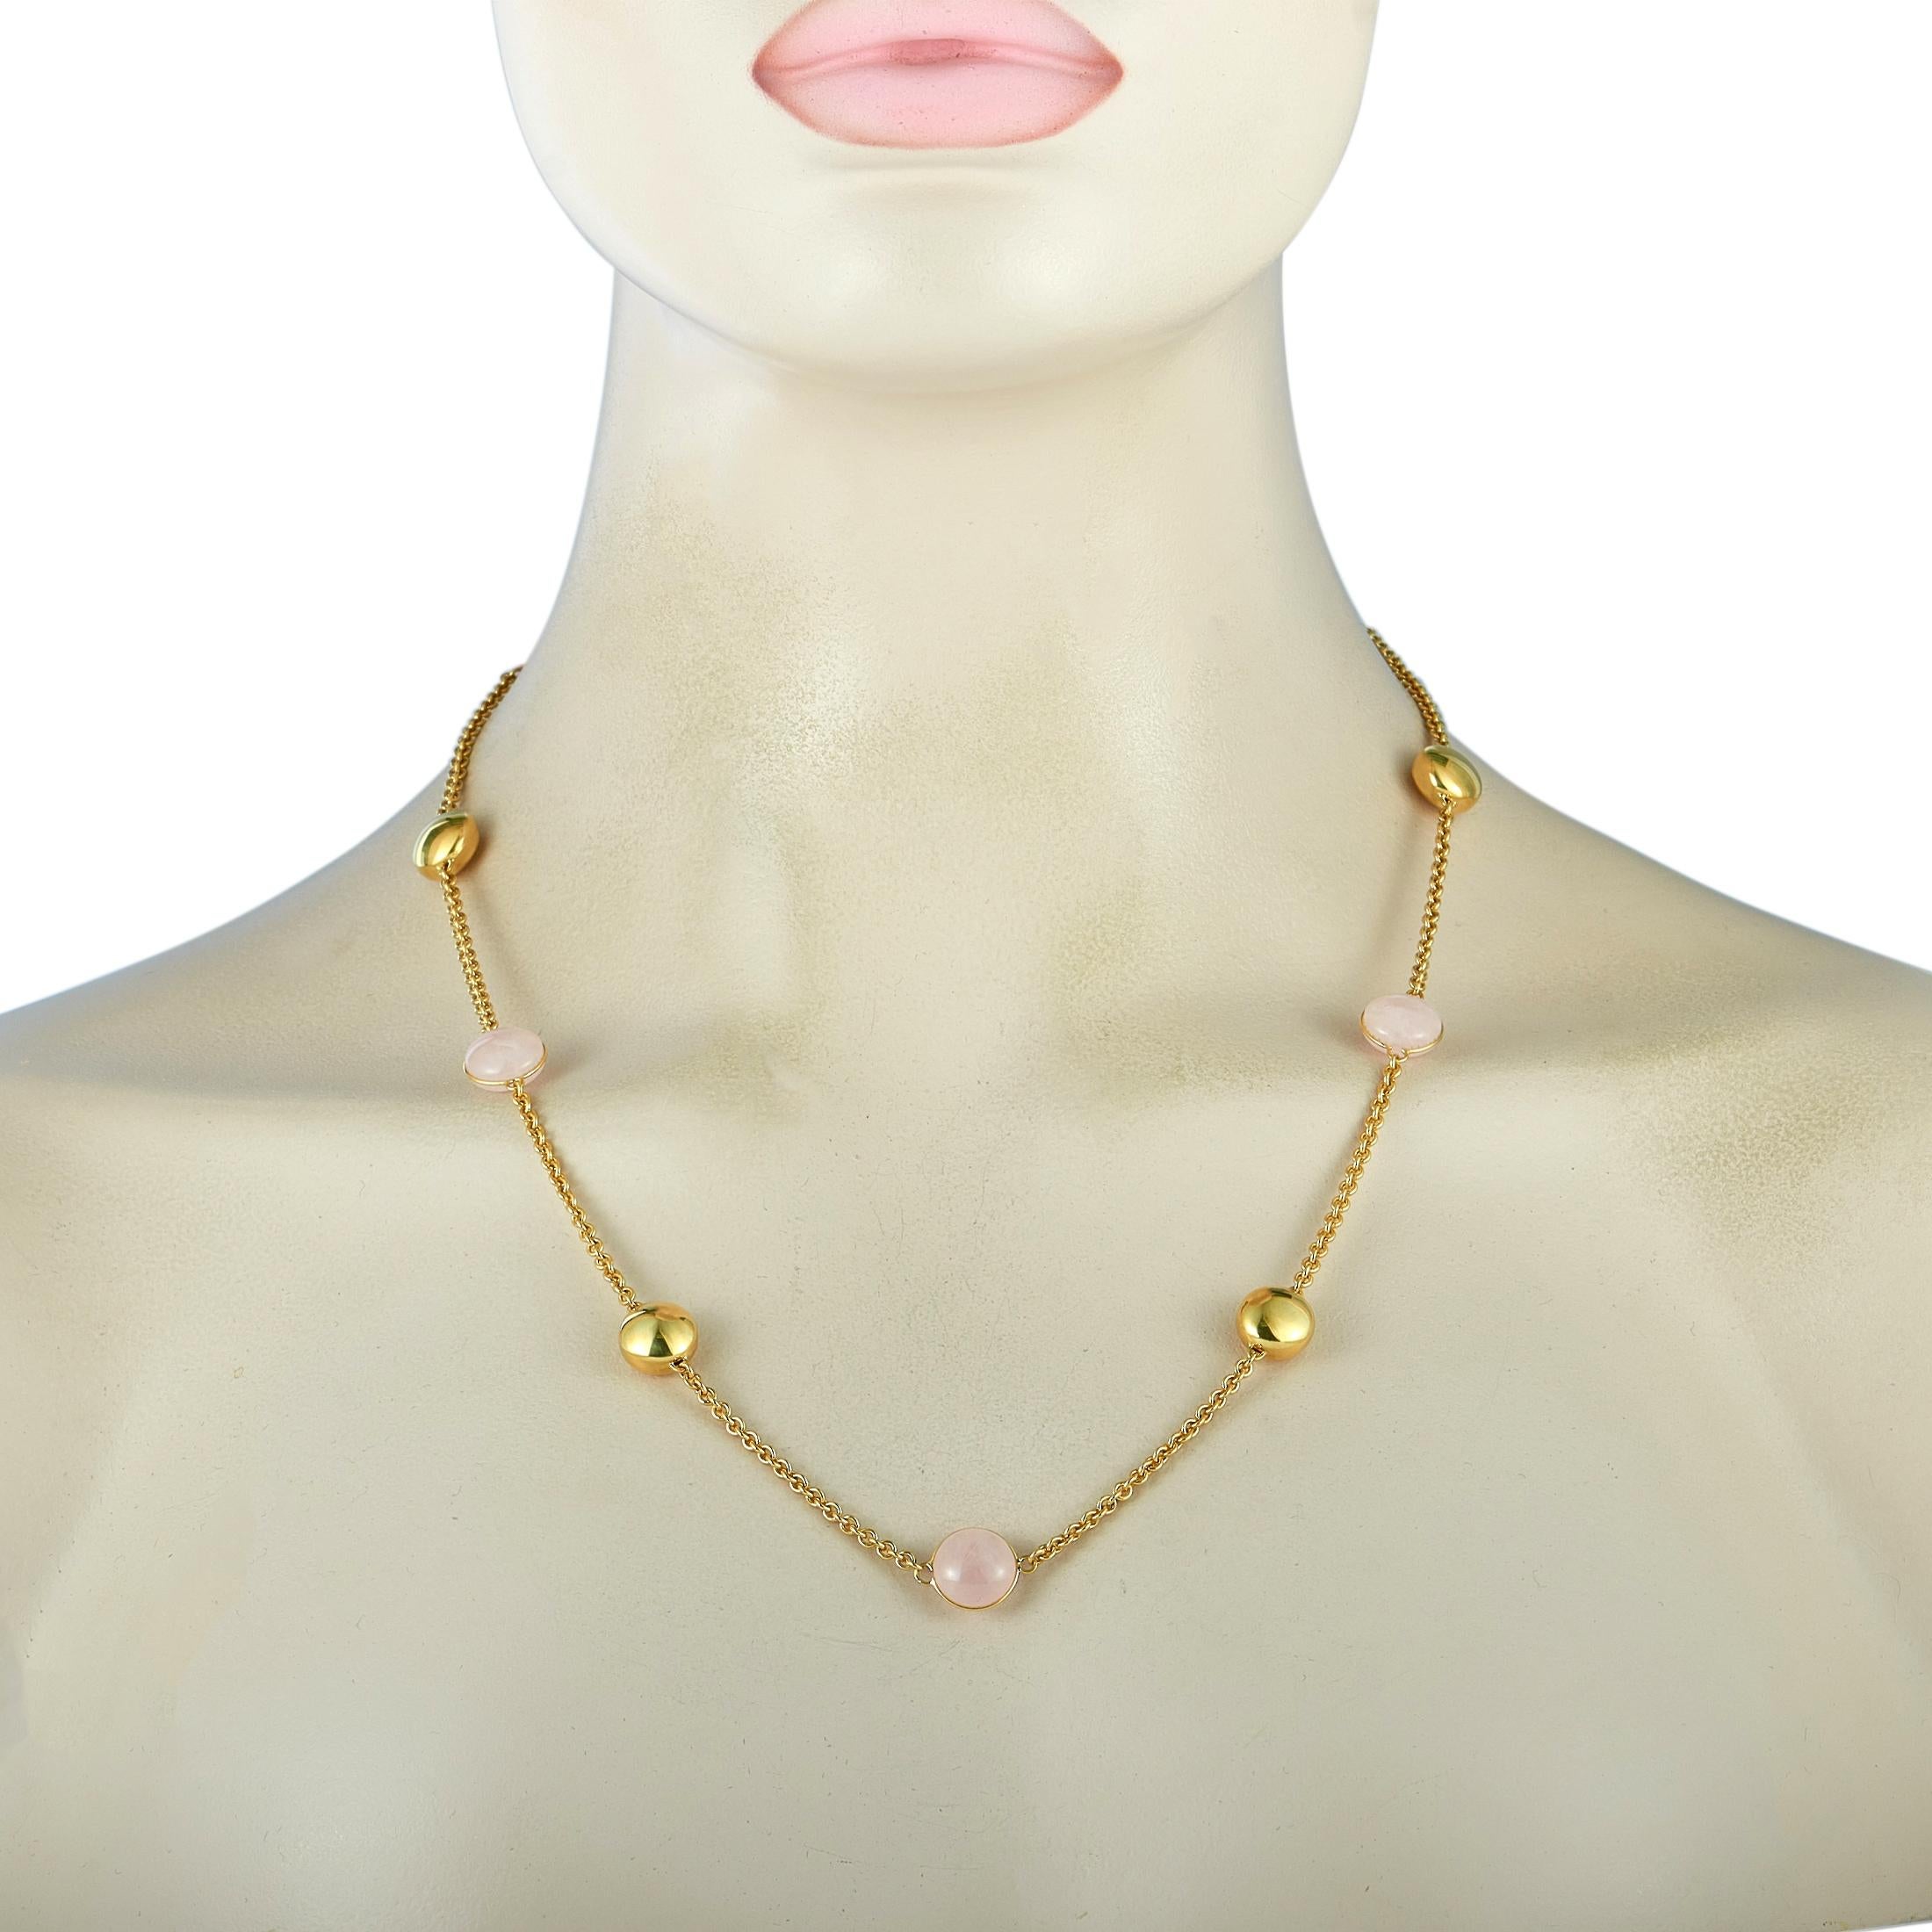 This Chimento necklace is made of 18K yellow gold and embellished with rose quartz. The necklace weighs 29.6 grams and measures 21” in length.
 
 Offered in estate condition, this jewelry piece includes the manufacturer’s box.